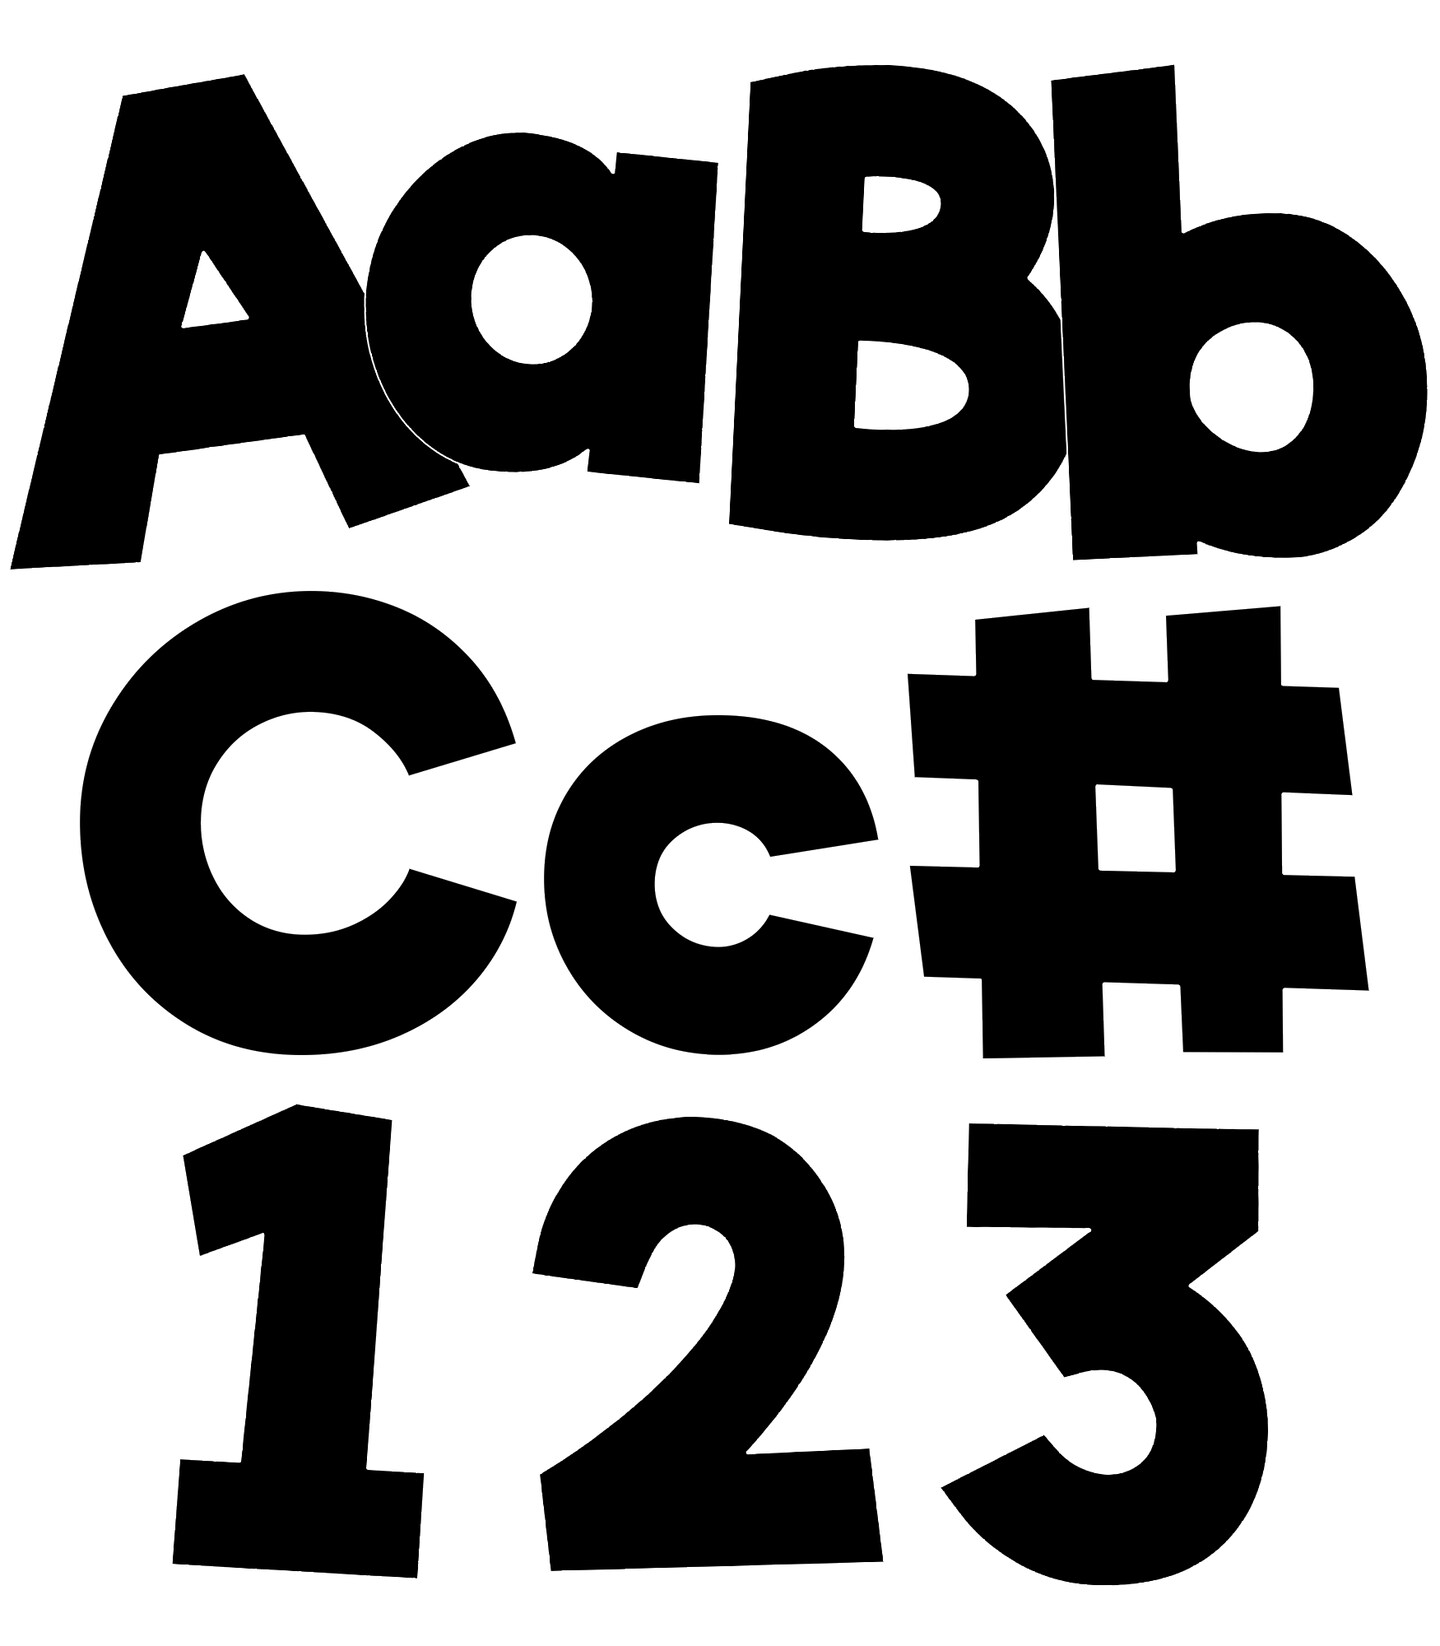 Carson Dellosa 219 Piece 4 Inch Black Cutout Letters for Bulletin Boards, Numbers, Punctuation, Symbols and More, Black Bulletin Board Letters, Black Letter Cut Outs